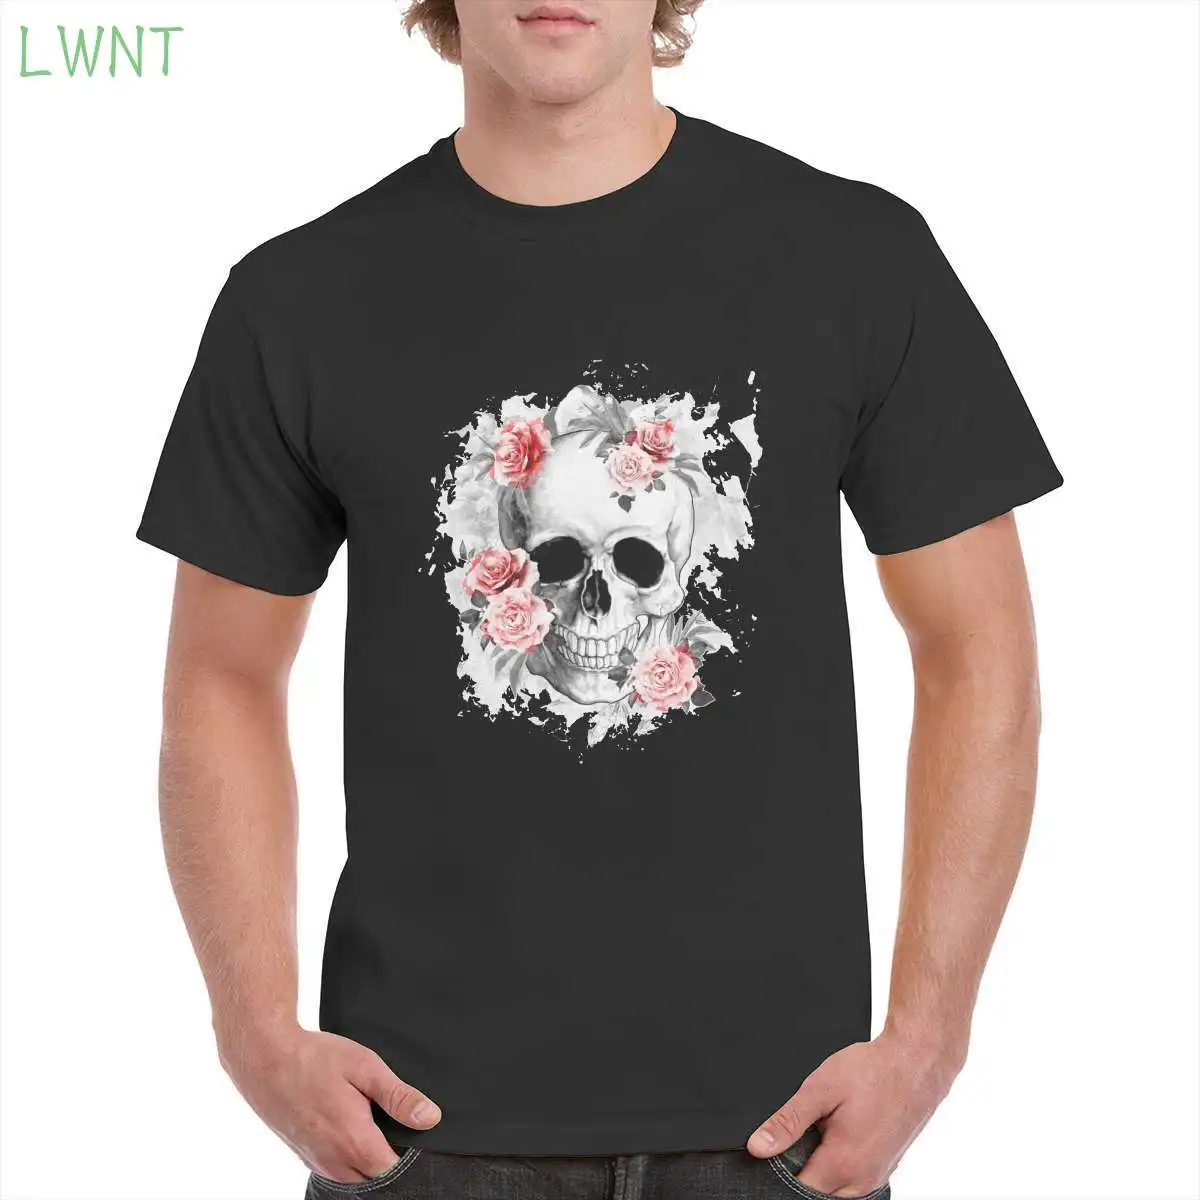 

Skull Human Anatomy Floral Print Tshirt Unisex 100% Cotton Black Red Watercolor Roses T Shirt Top Oversized Male/Female T-Shirts